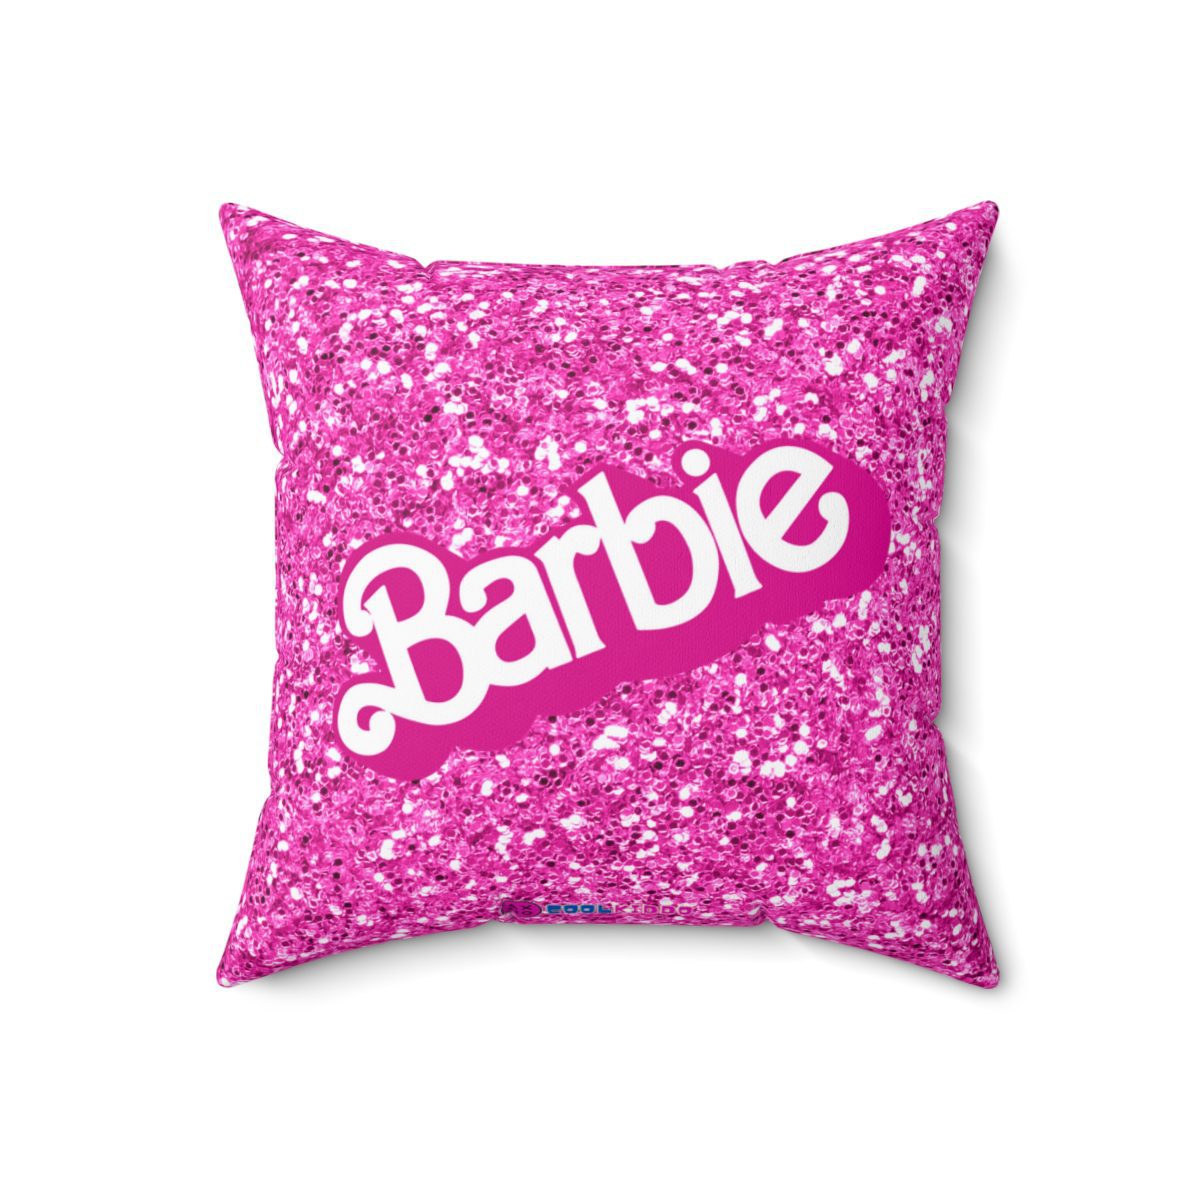 Barbie Glitter Simulation Pink Cushion: Double-Sided Sparkle for Stylish Comfort Cool Kiddo 12